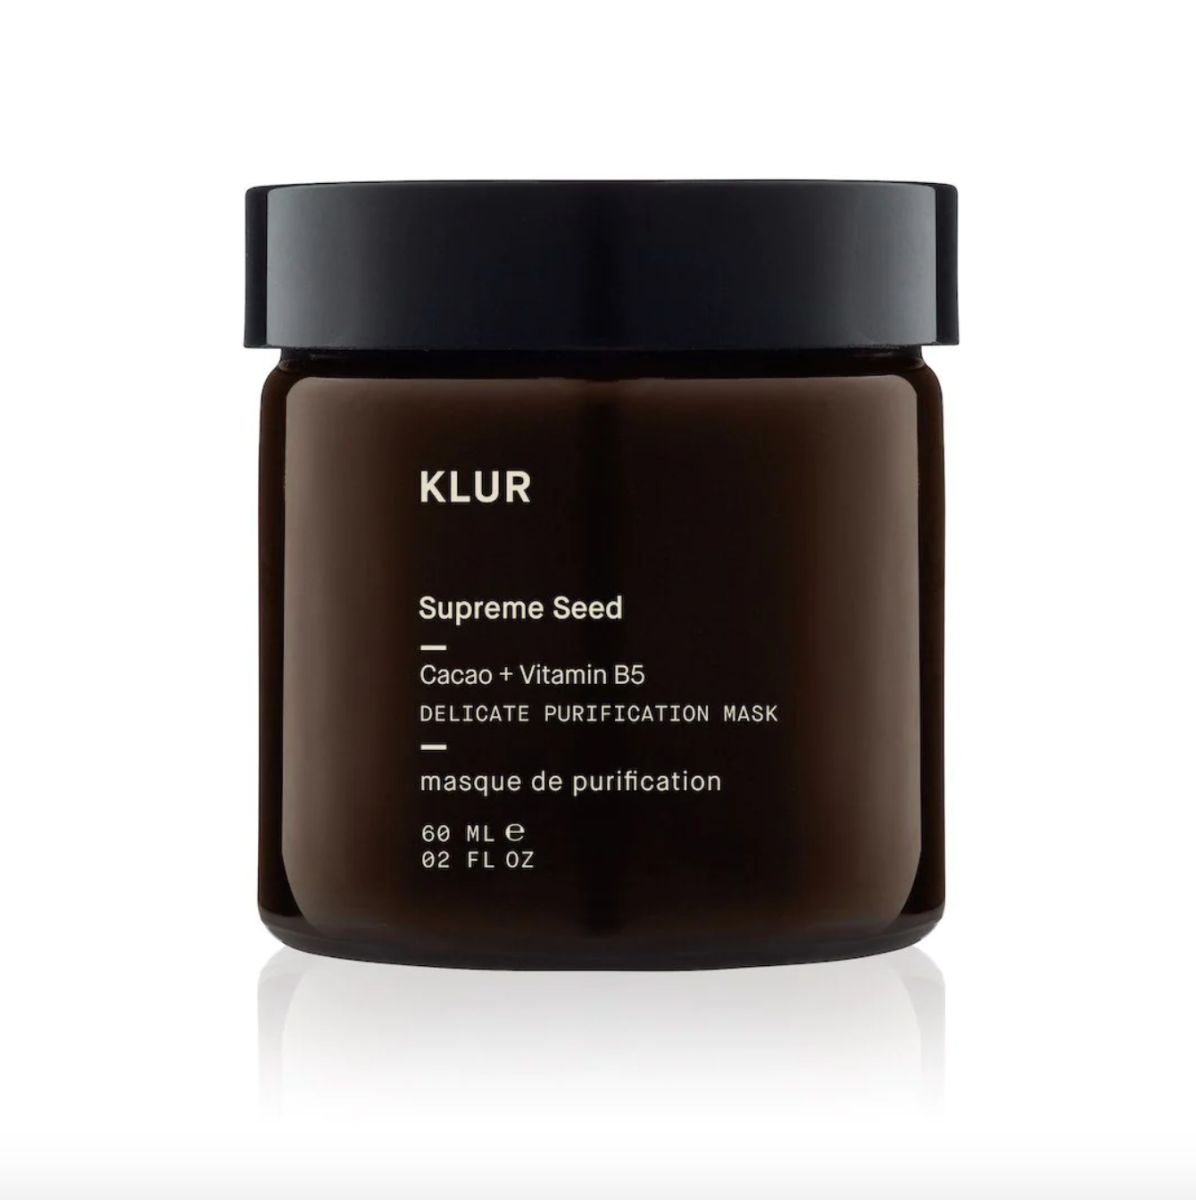 KLUR-Supreme-Seed-Delicate-Purification-Mask